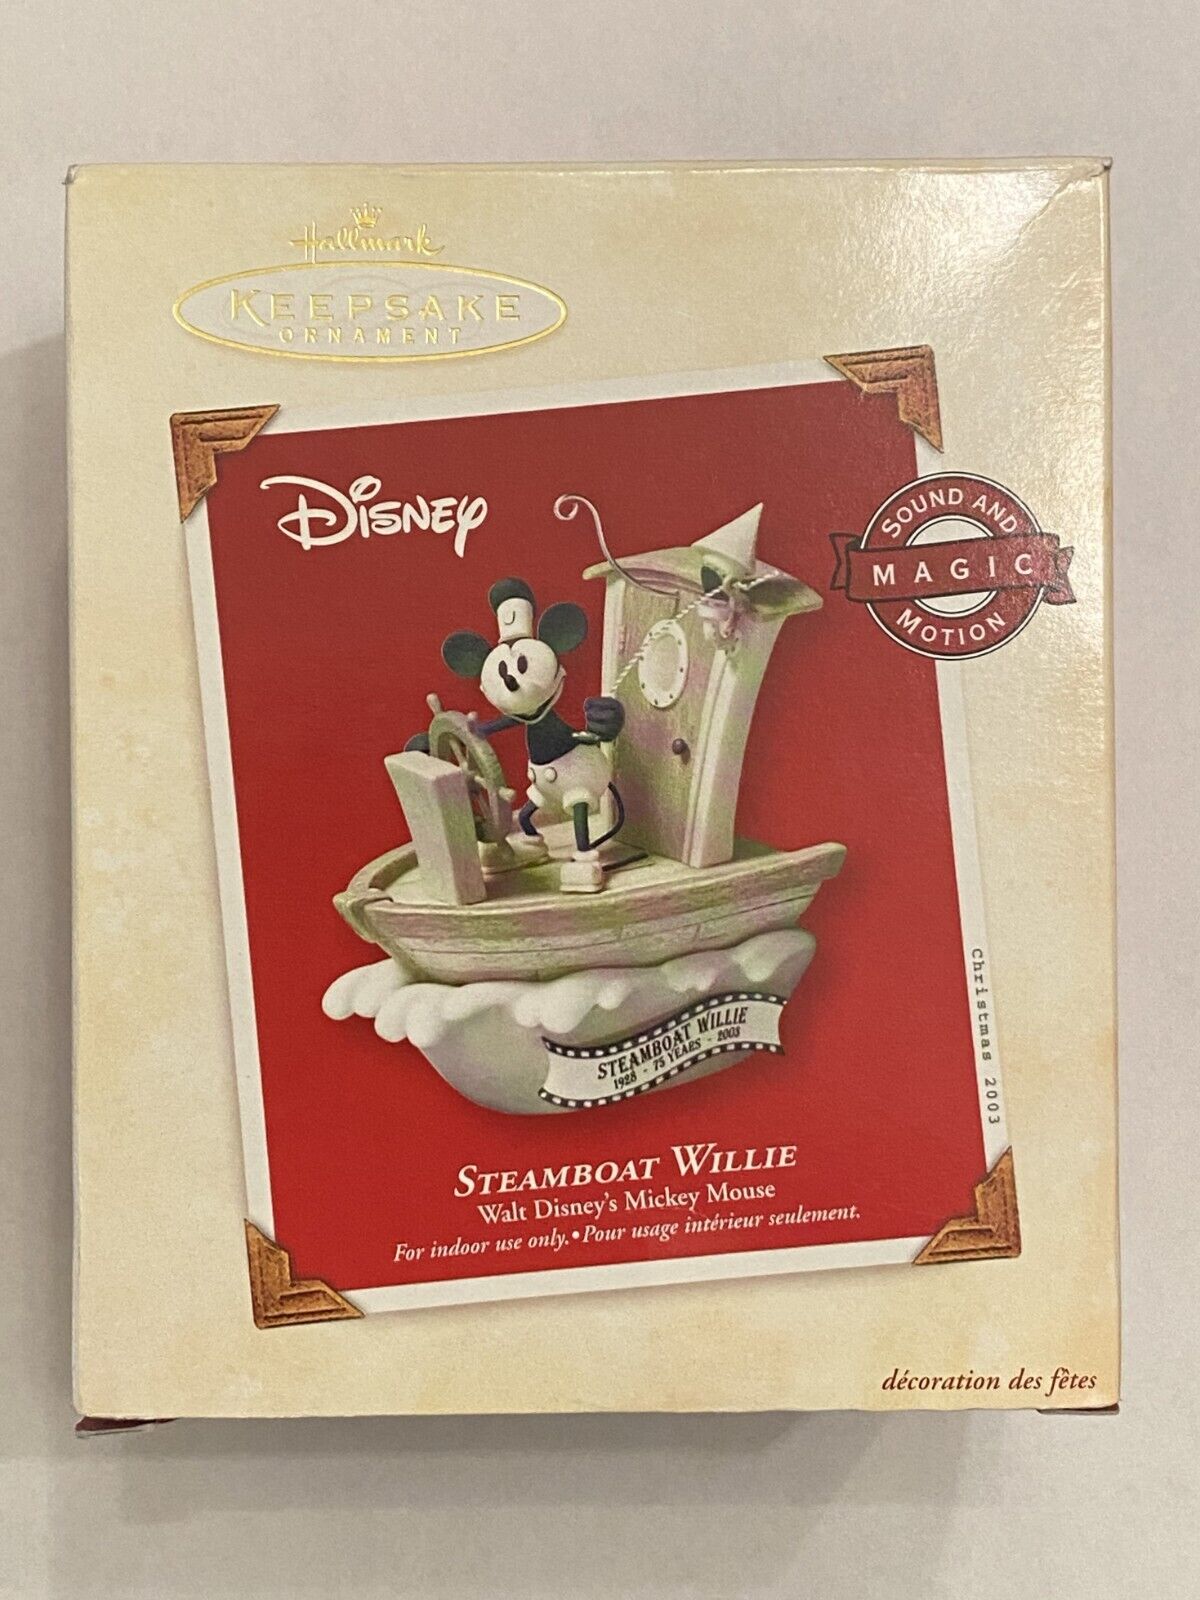 HALLMARK Disney Mickey Mouse Steamboat Willie Ornament. Dated 2003 Christmas. 